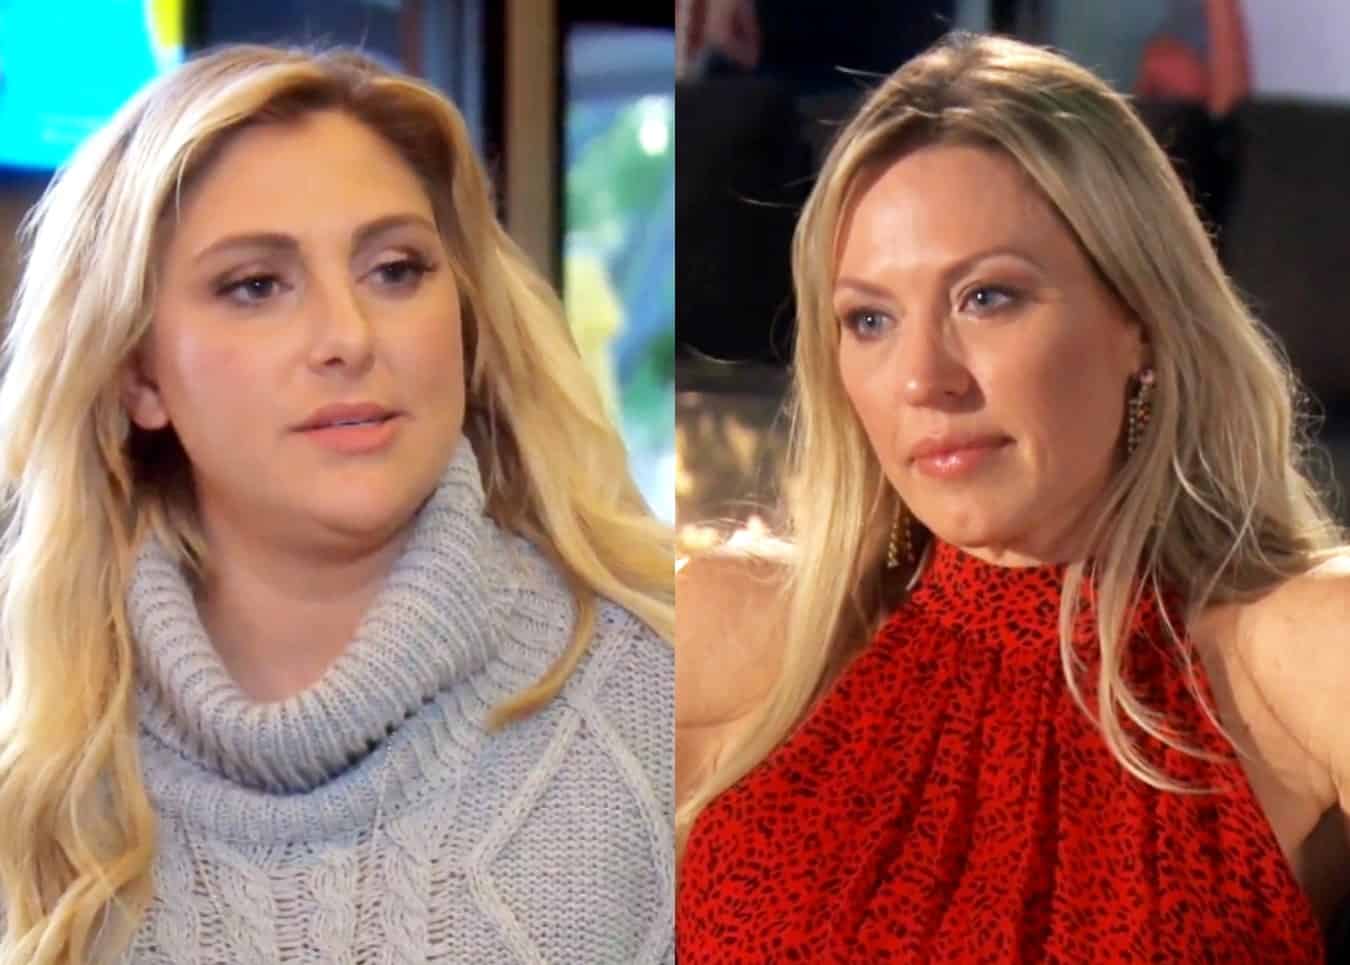 RHOC Recap: Gina Accuses Sean of Sending Her a "Creepy" Text as Braunwyn Struggles With Sobriety